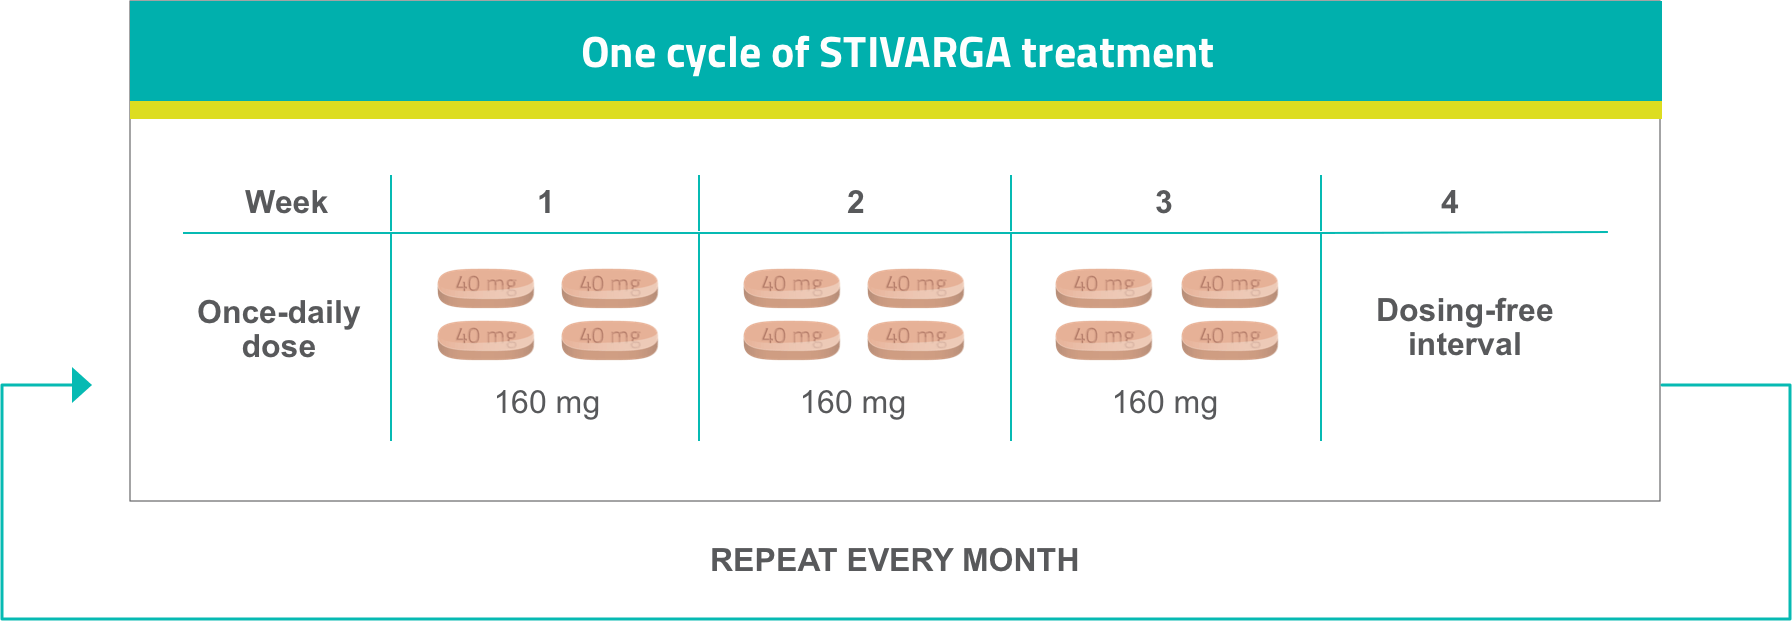 One cycle of STIVARGA® (regorafenib) treatment. Once-daily dose of 160 mg (4 tablets) for 3 weeks, followed by dosing-free interval.